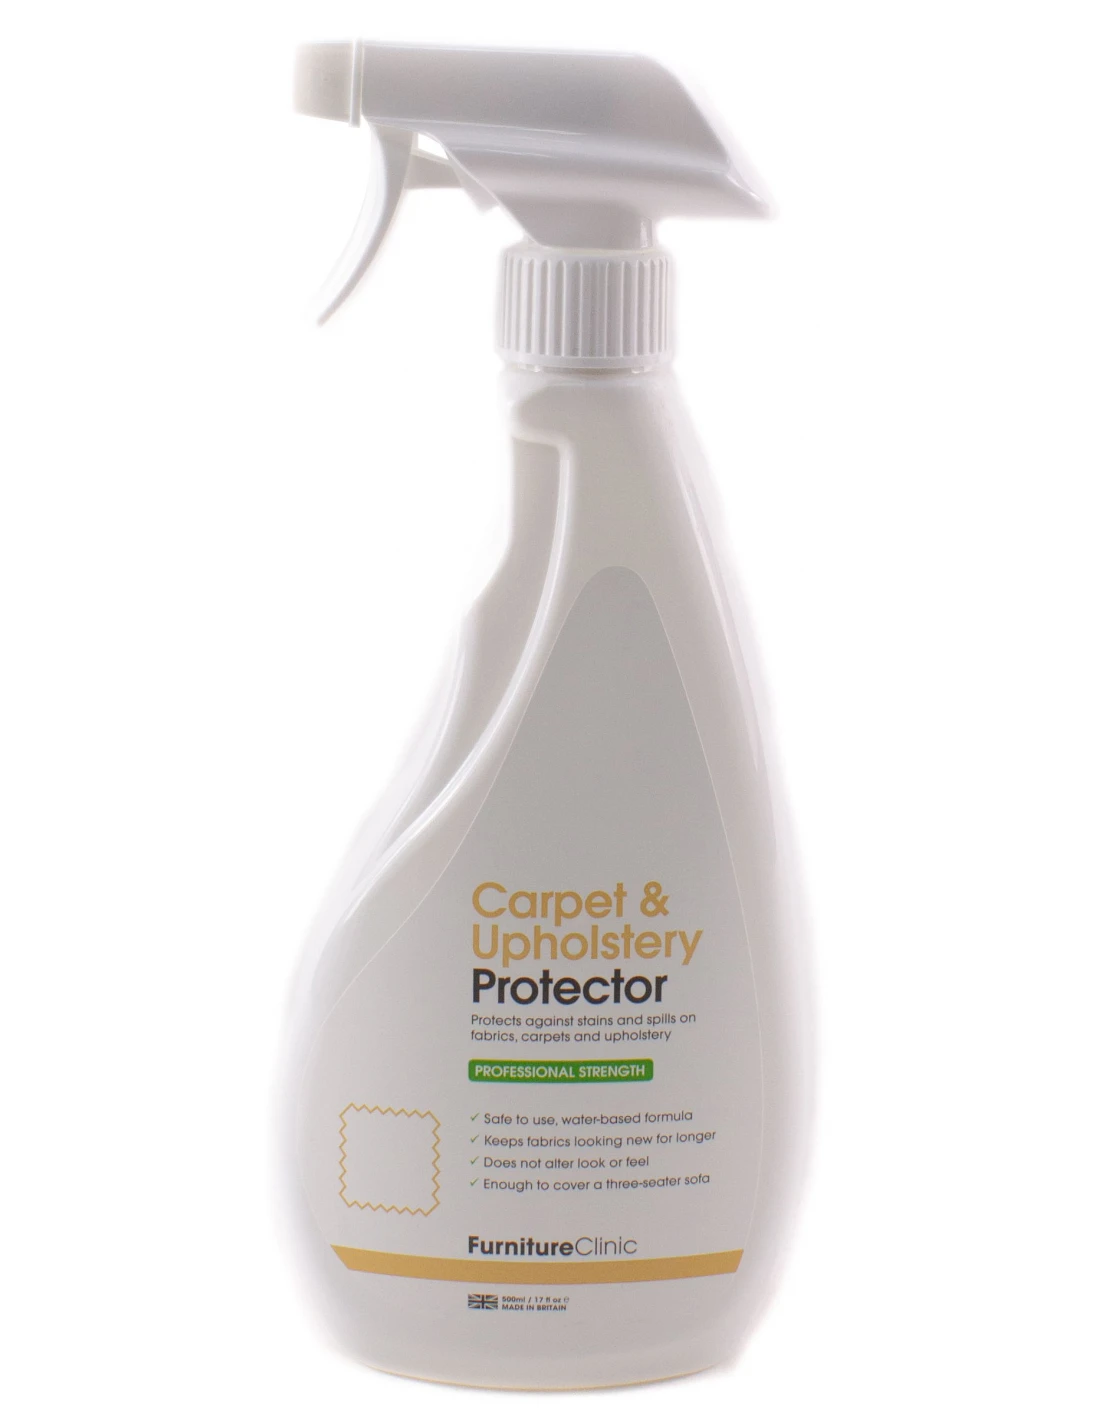 Furniture Clinic Carpet & Upholstery Protector Nepal